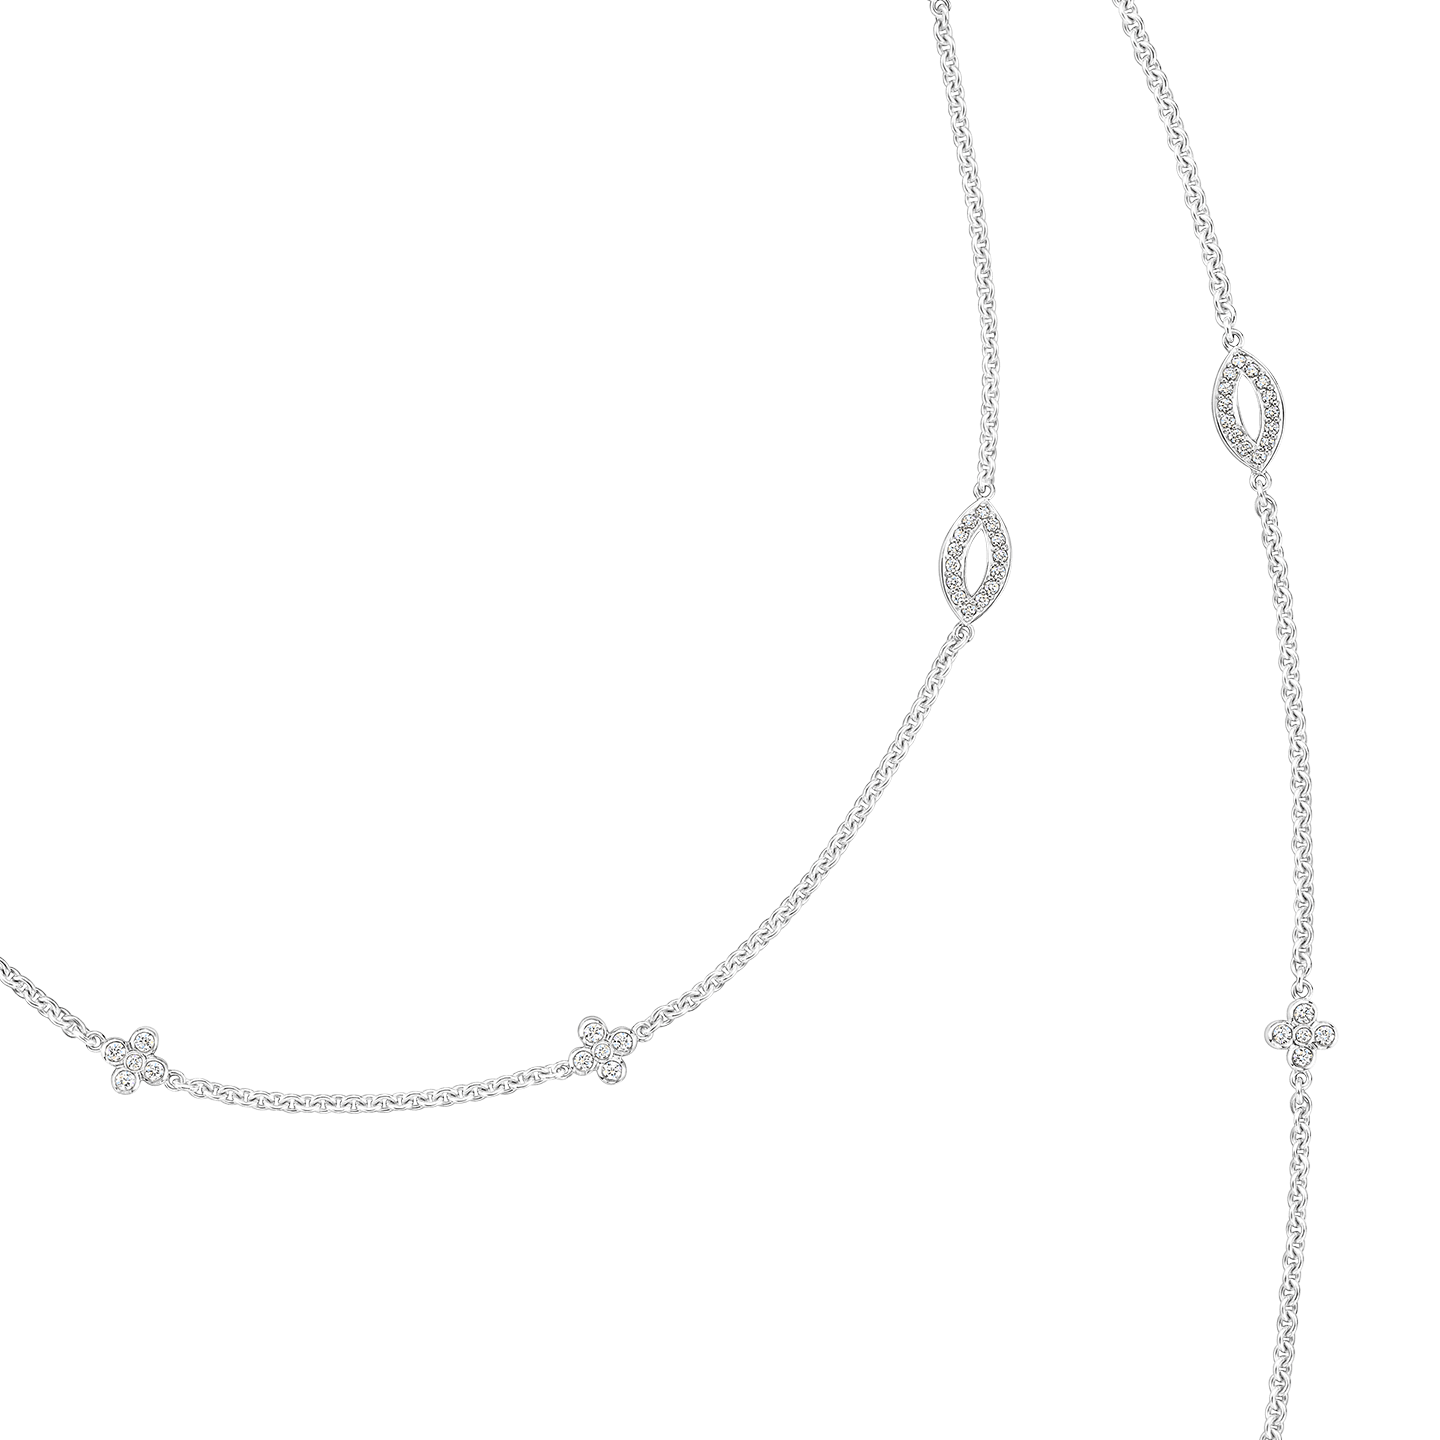 Lily Cluster Diamond Sautoir Necklace in Platinum, Product Image 4